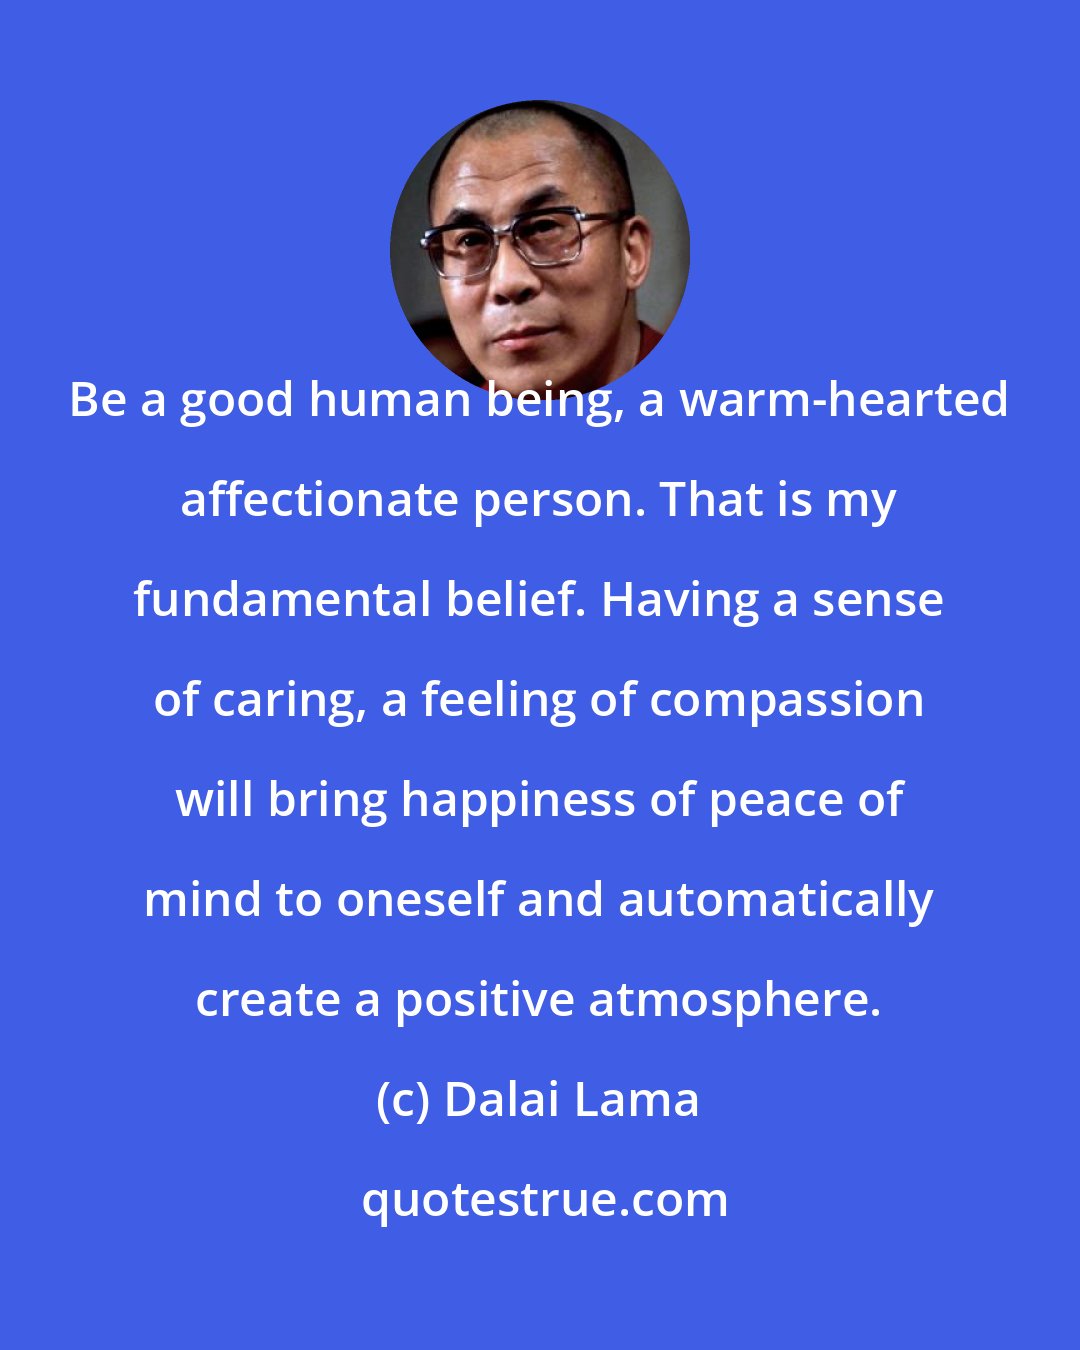 Dalai Lama: Be a good human being, a warm-hearted affectionate person. That is my fundamental belief. Having a sense of caring, a feeling of compassion will bring happiness of peace of mind to oneself and automatically create a positive atmosphere.